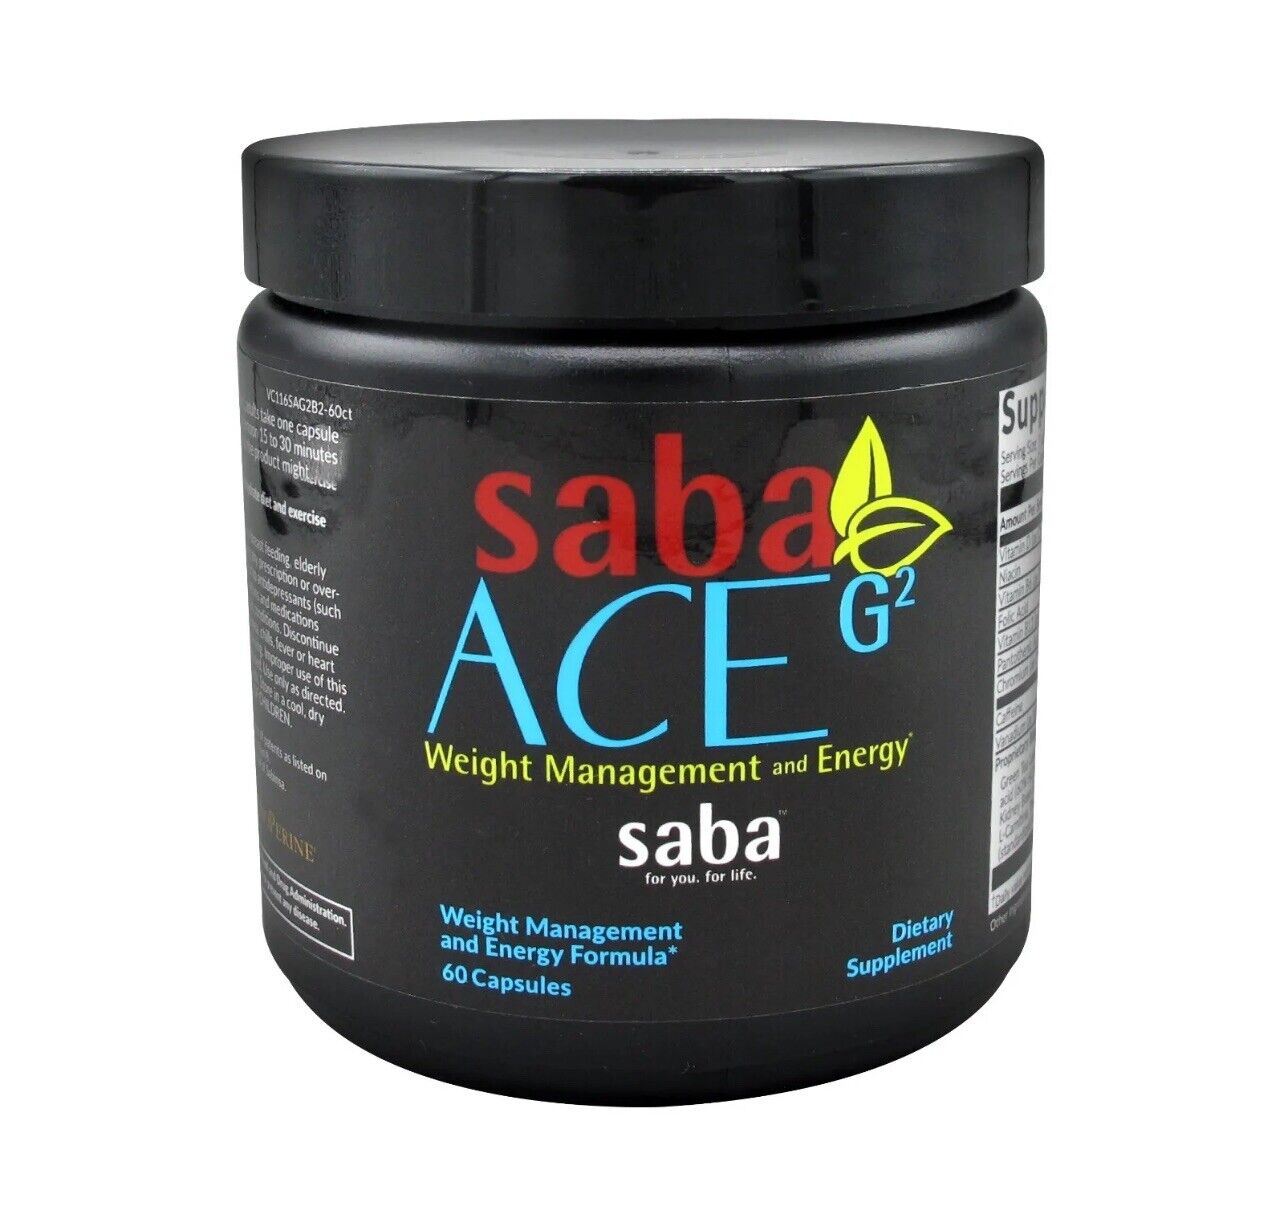 Saba ACE G2 Energy, Appetite Control & Weight Management - 60 Capsules